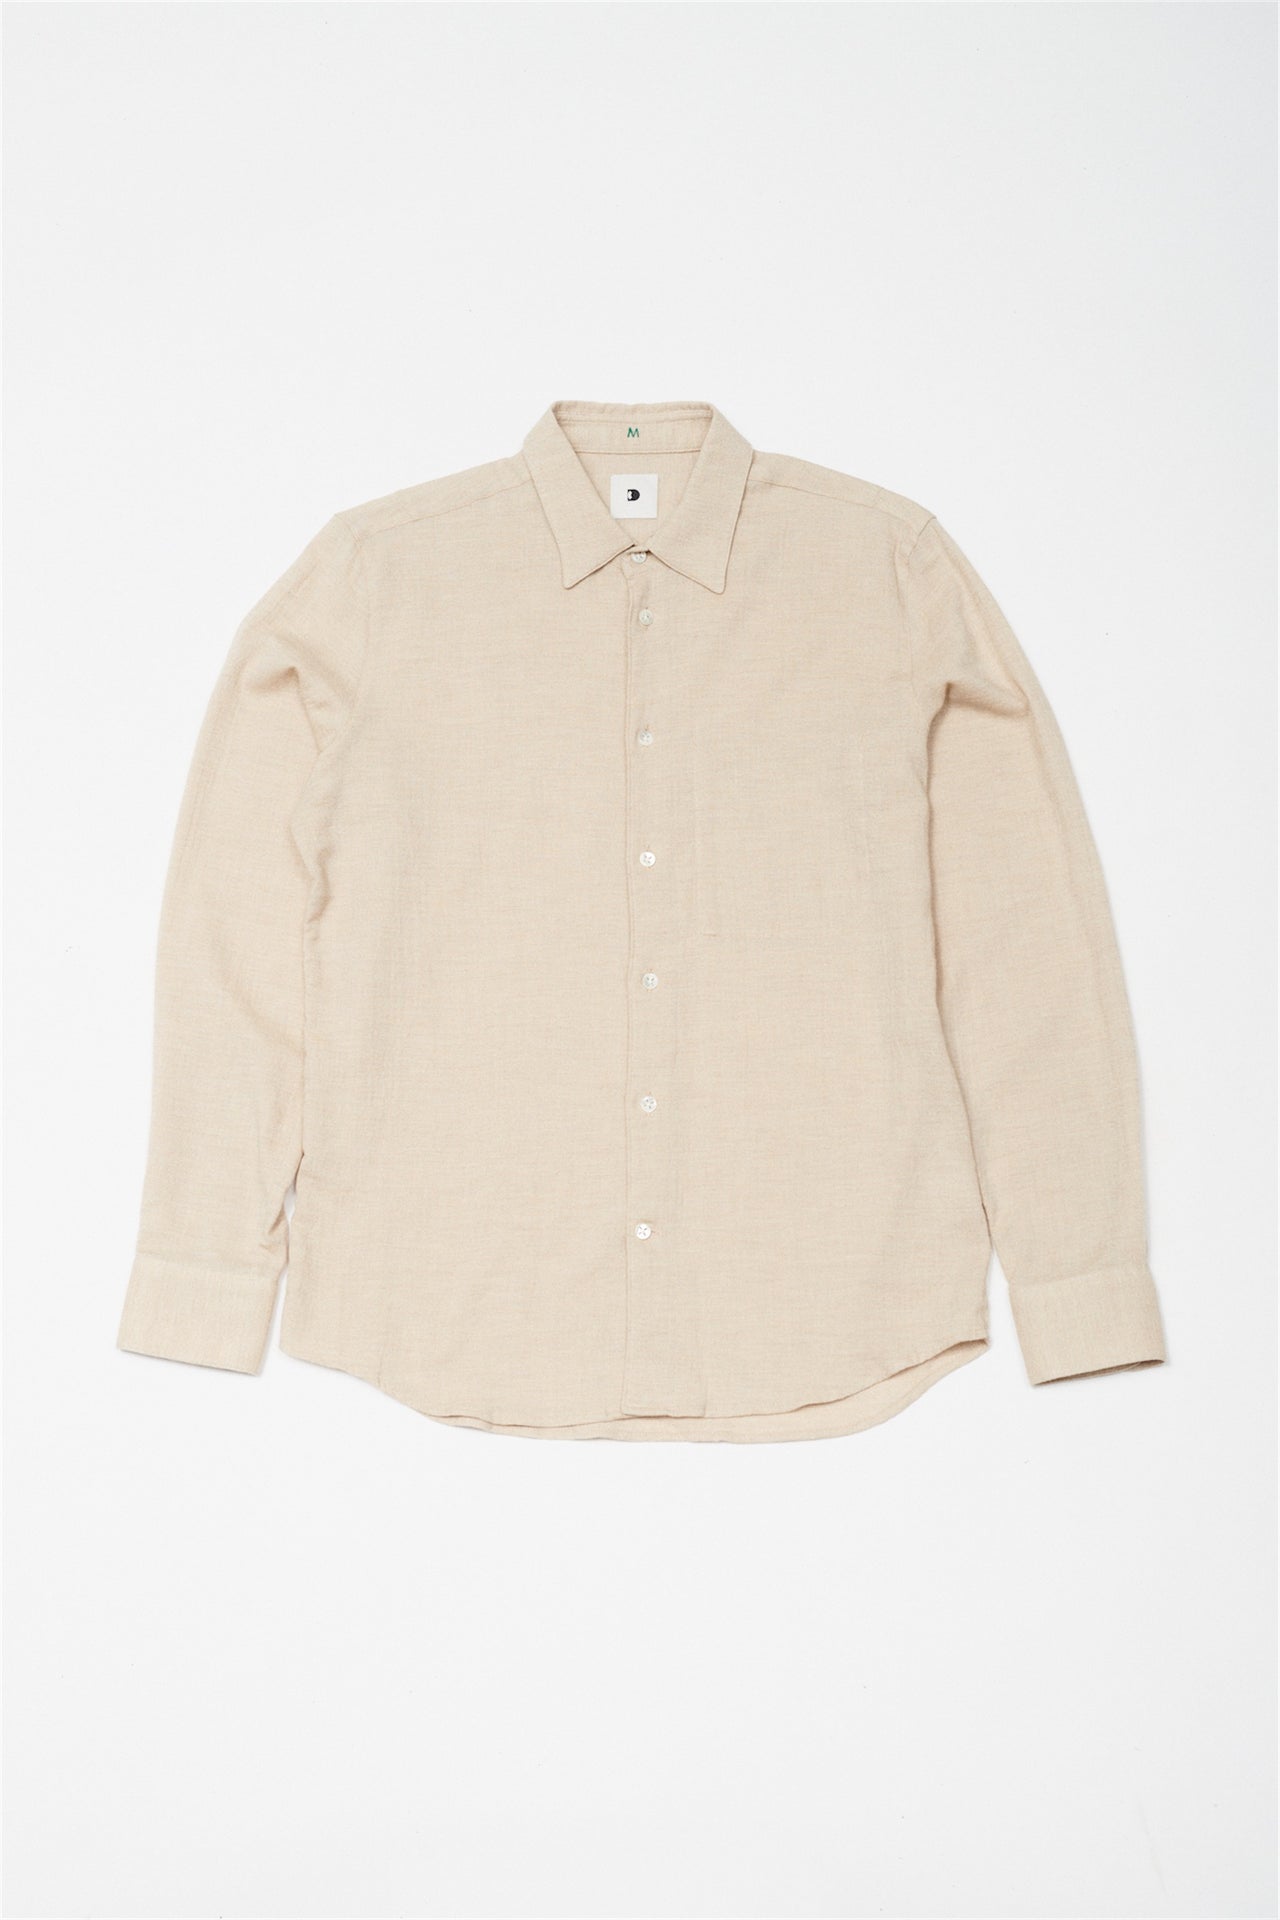 Feel Good Shirt in a Very Soft Beige Japanese Organic Cotton